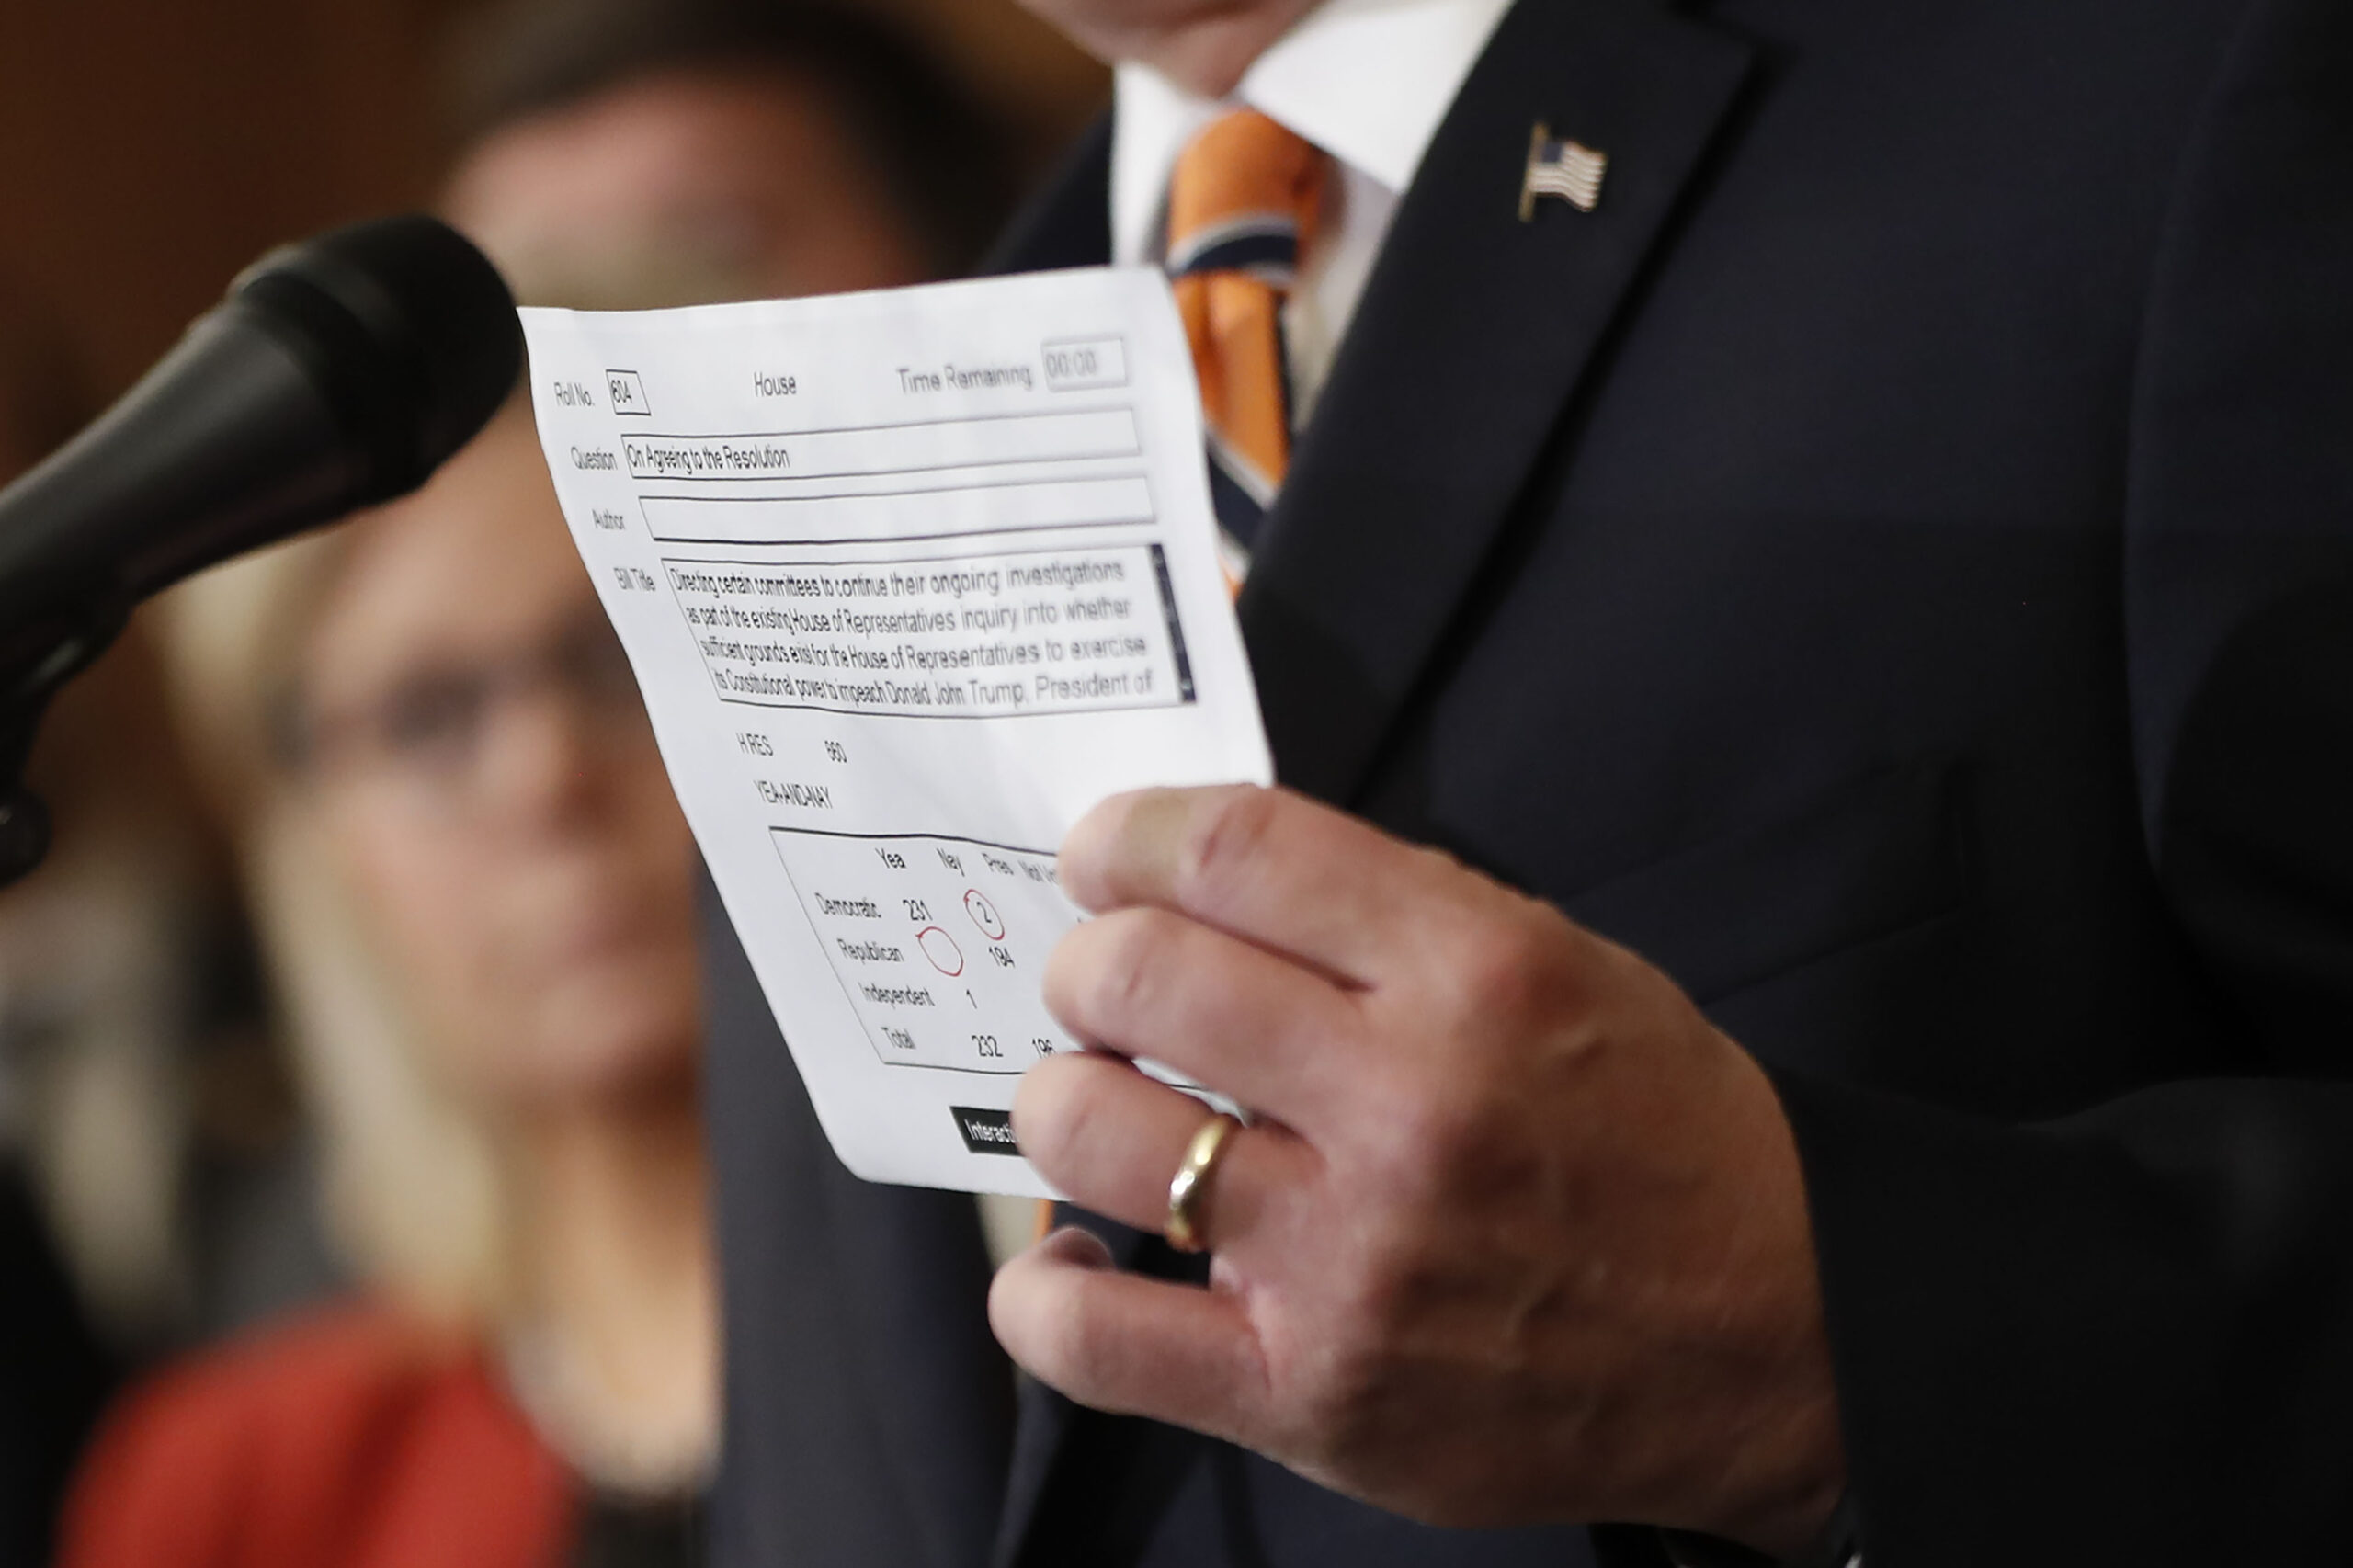 The House tally on impeachment on a piece of paper